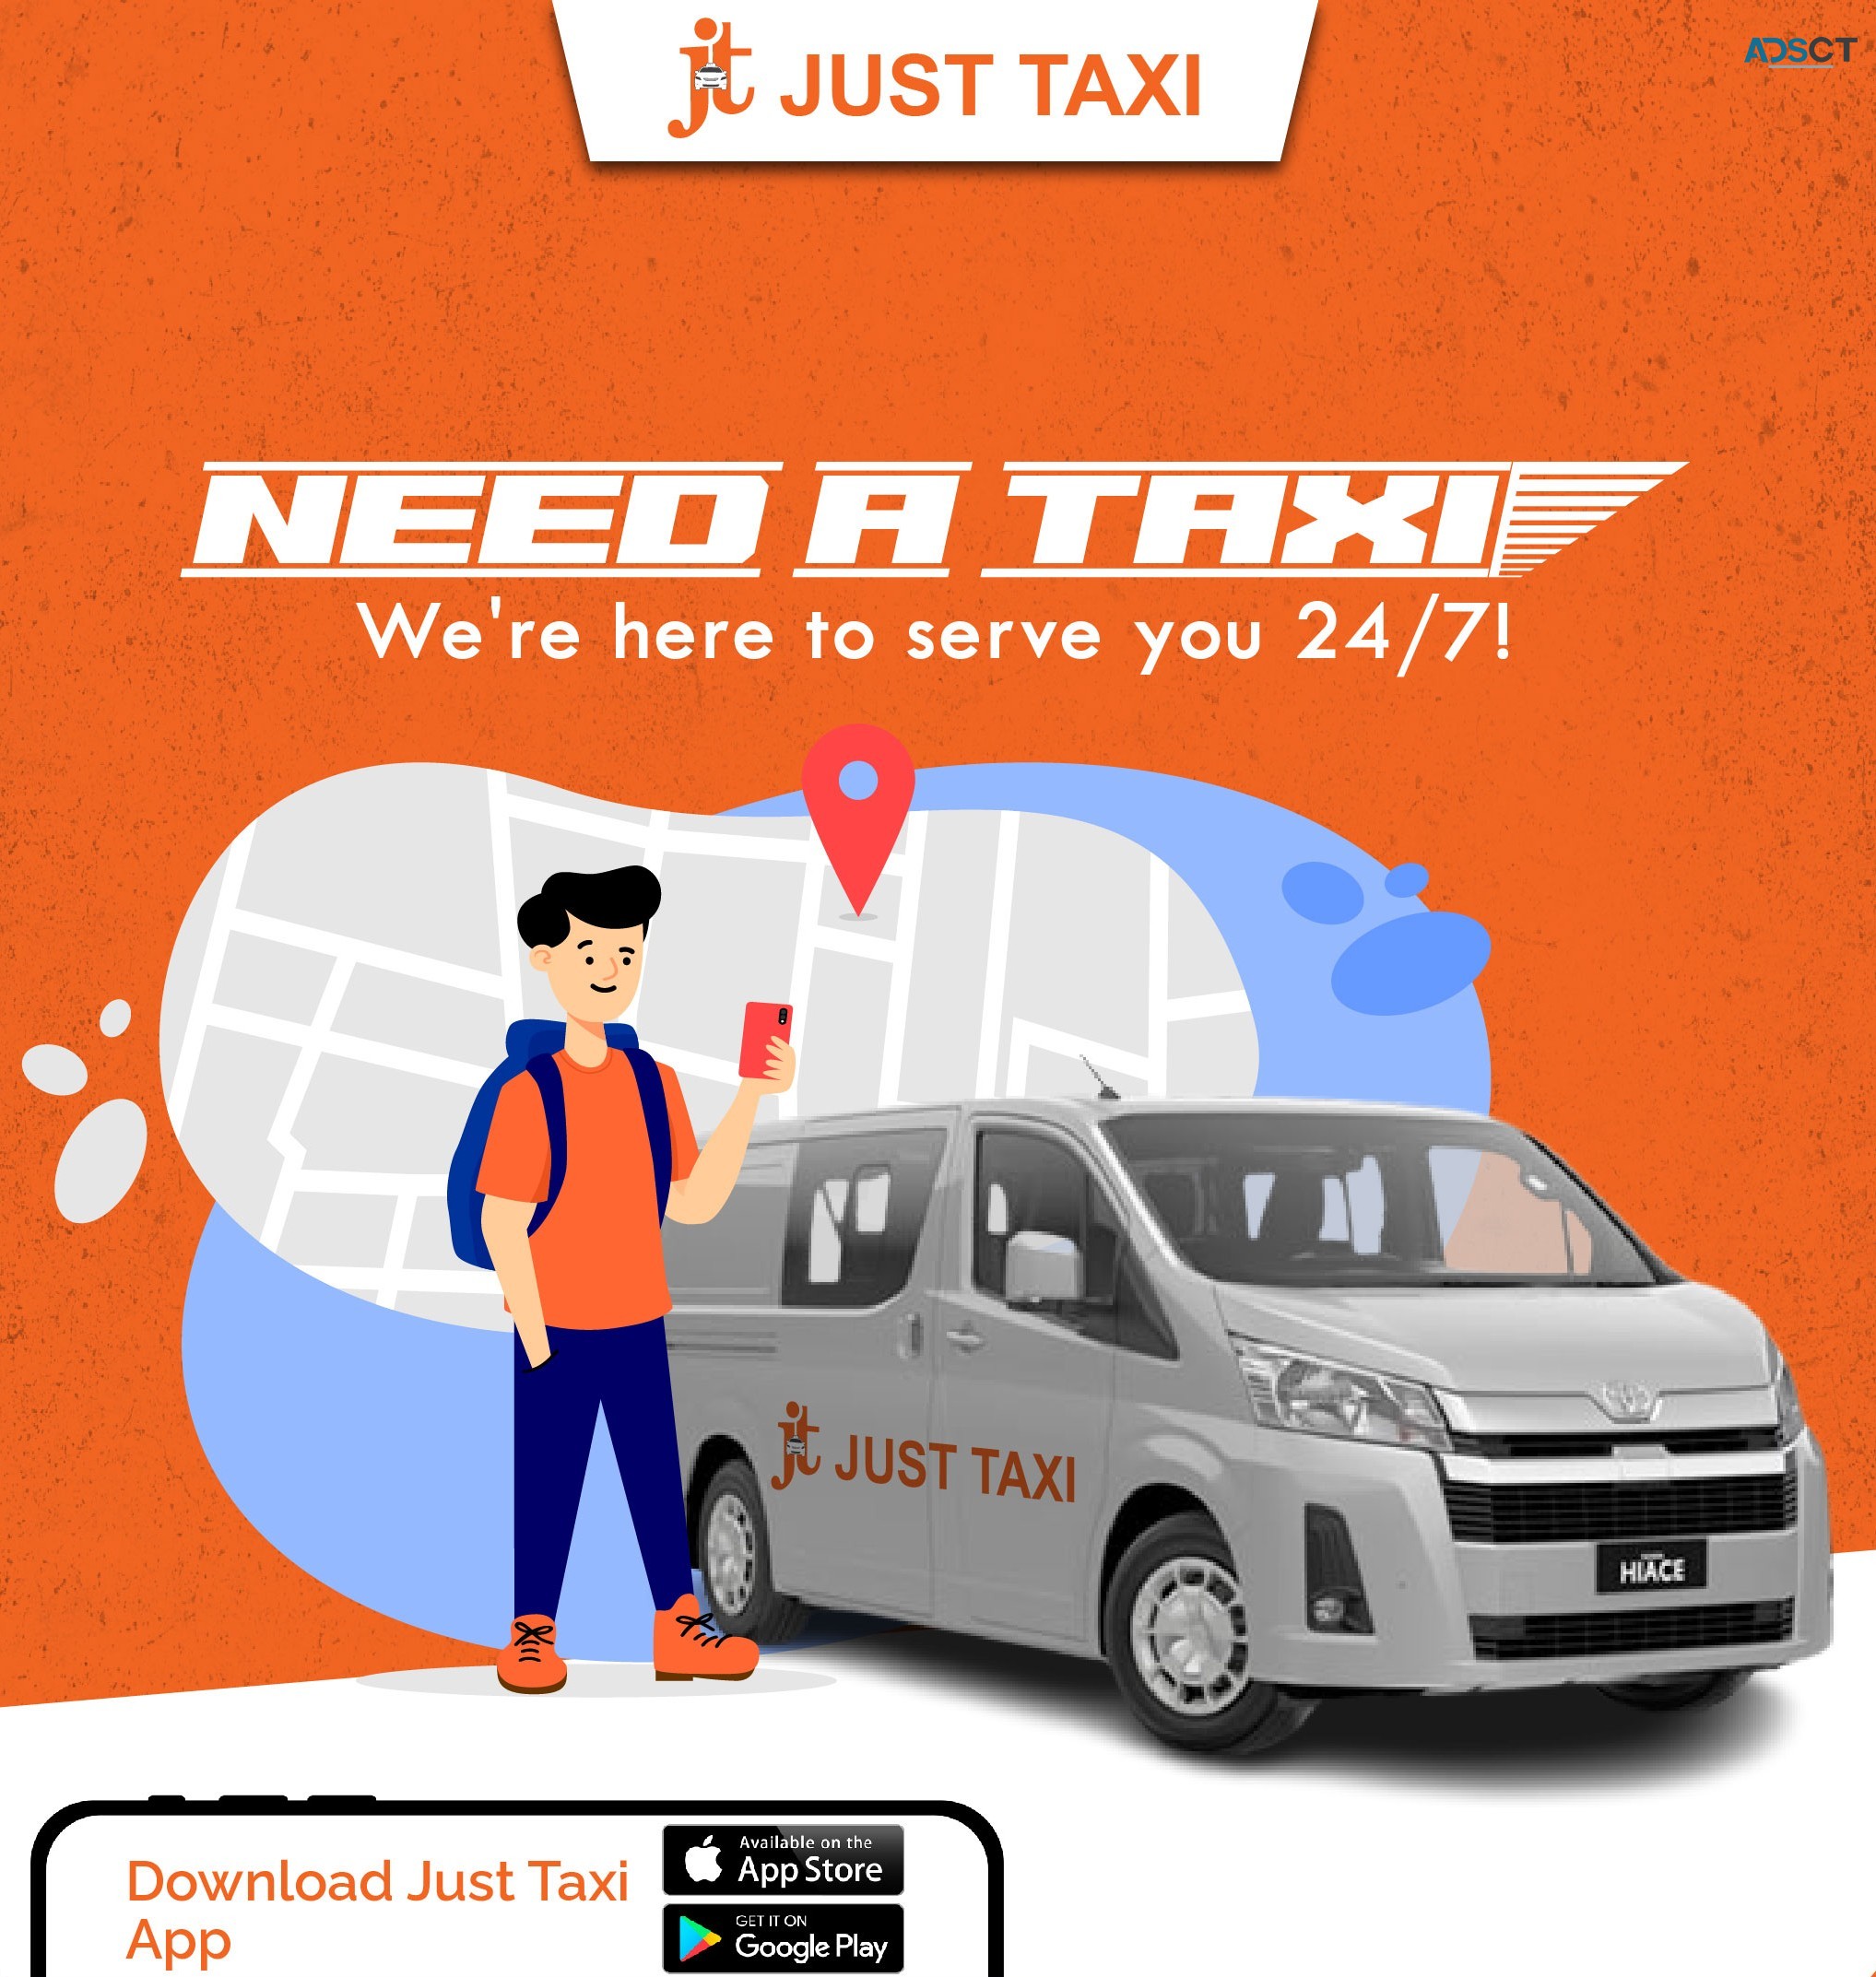 Best Taxi Near Me- Just Taxi Sydney